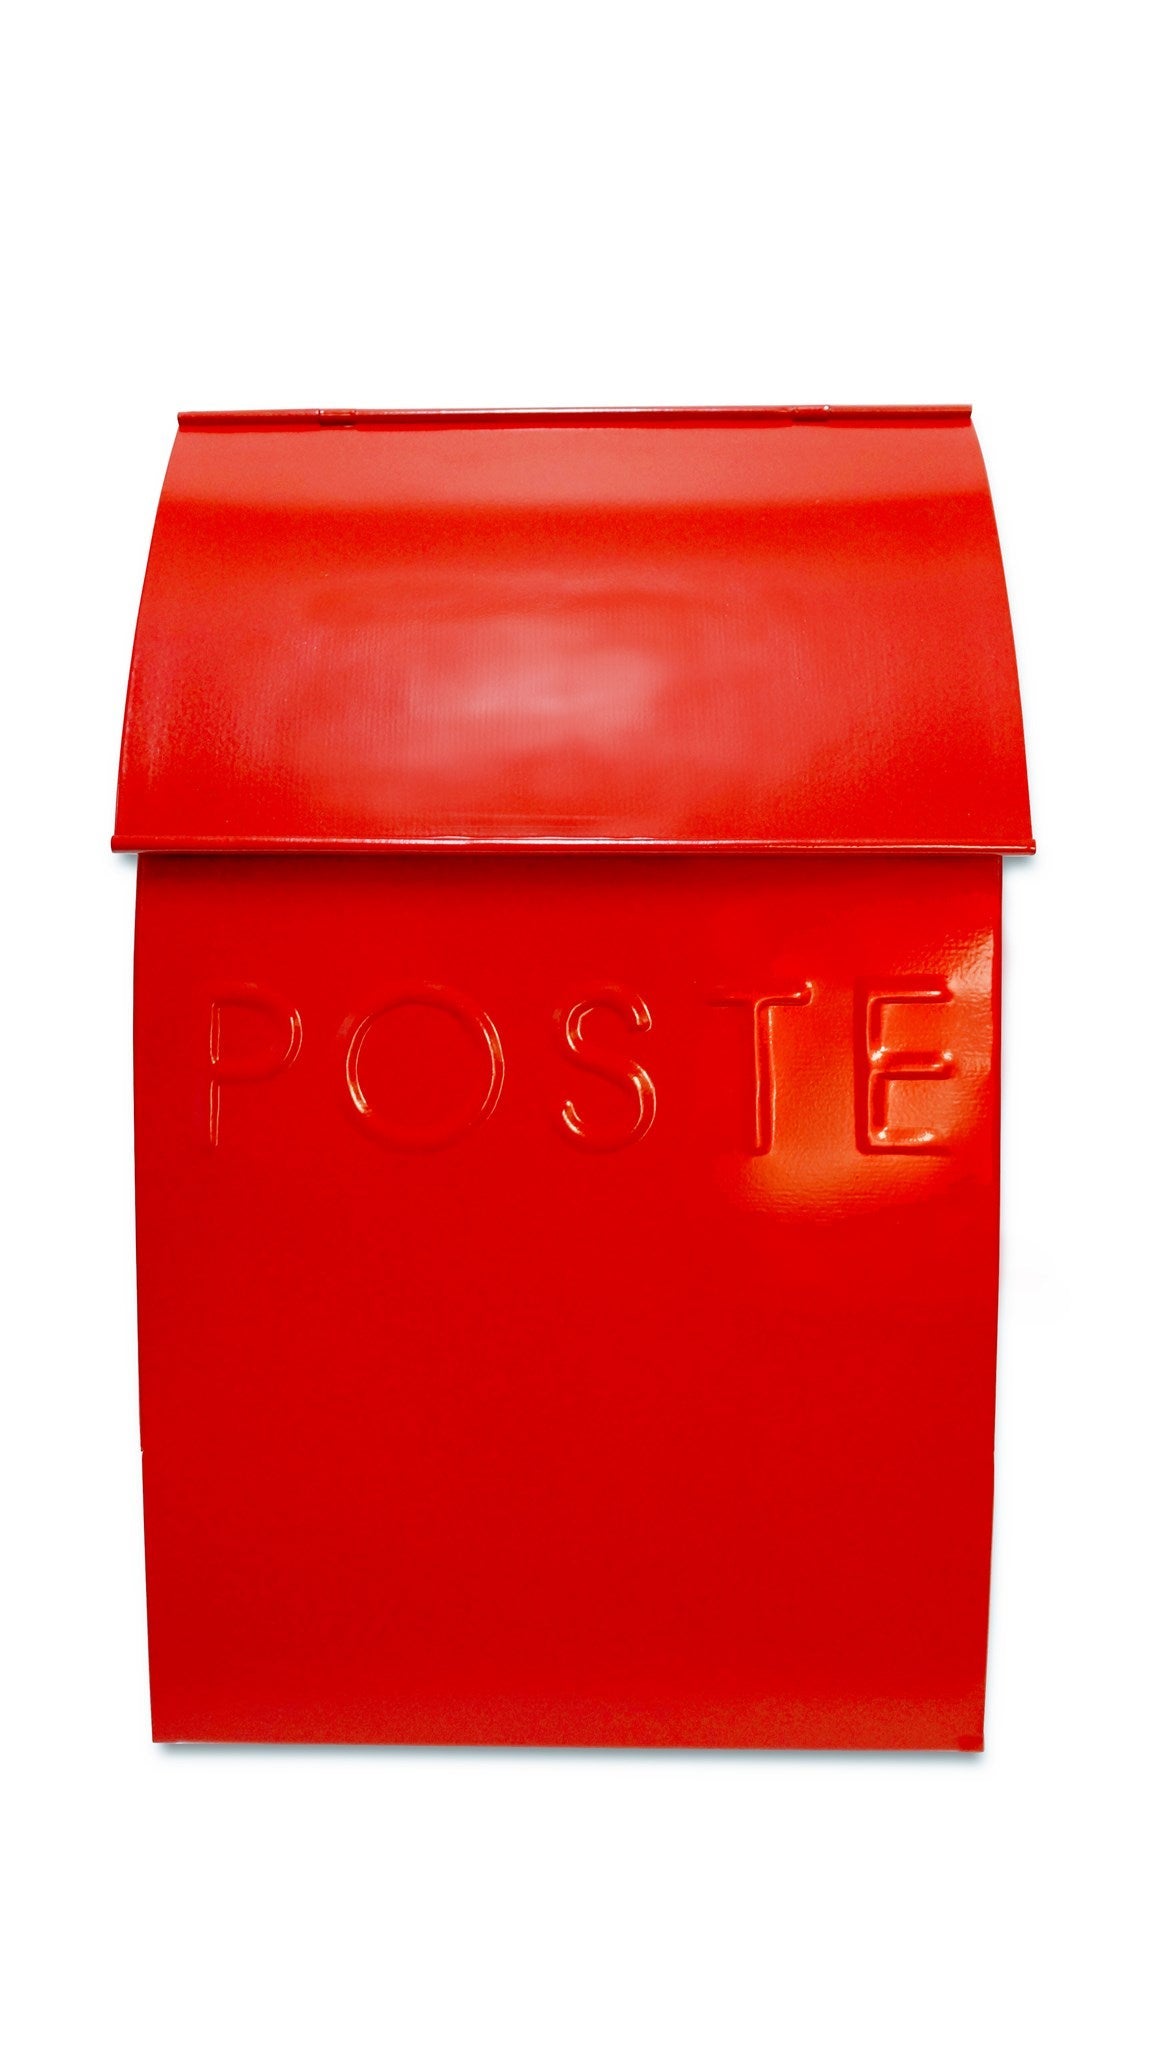 Milano Mailbox Red With POSTE, Last Chance